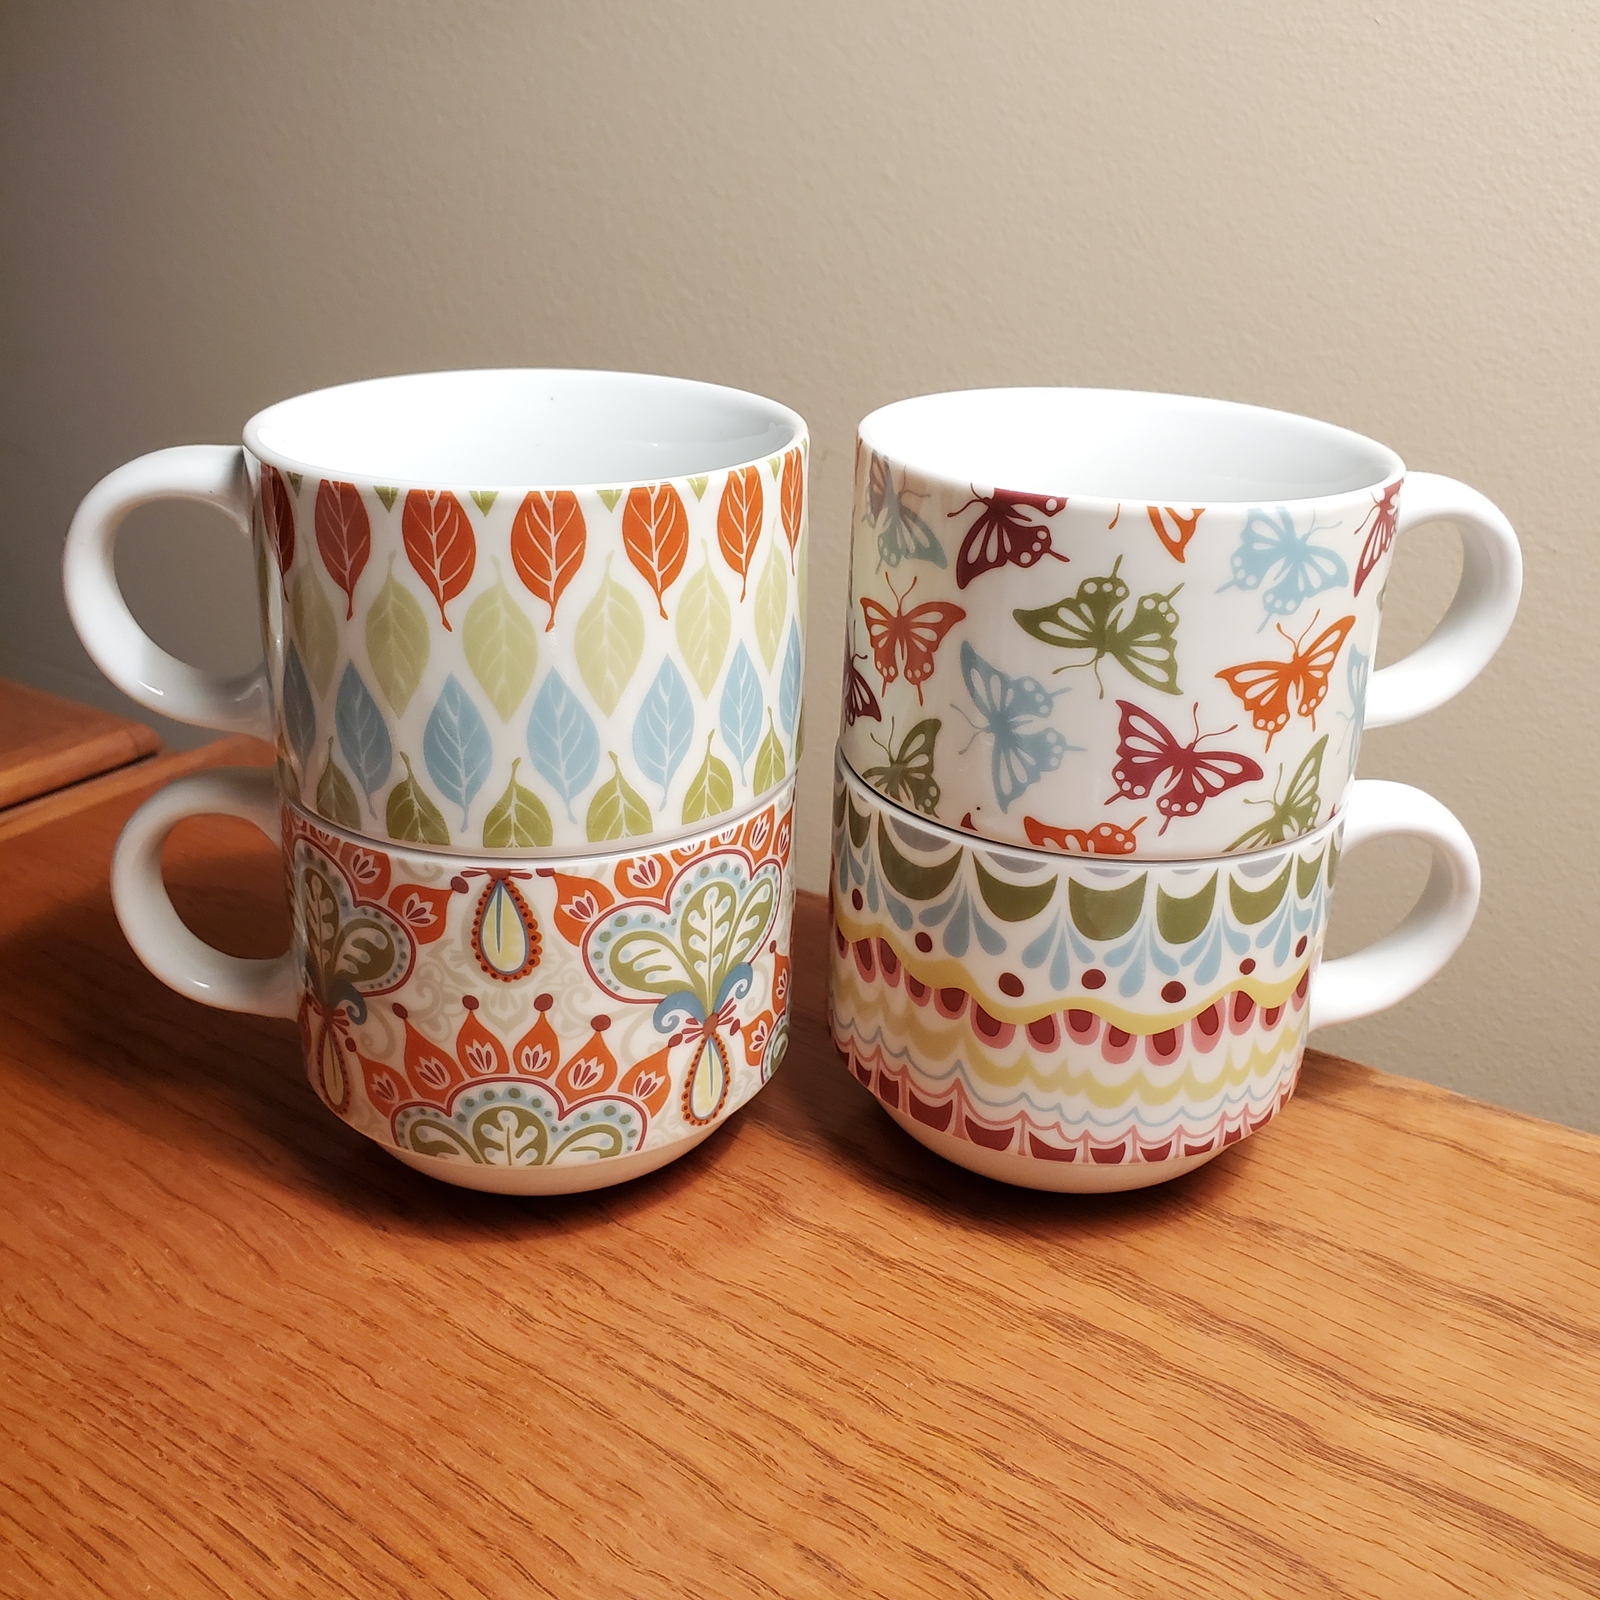 Pier One stackable Coffee Mugs, set of 4, butterfly paisley leaves